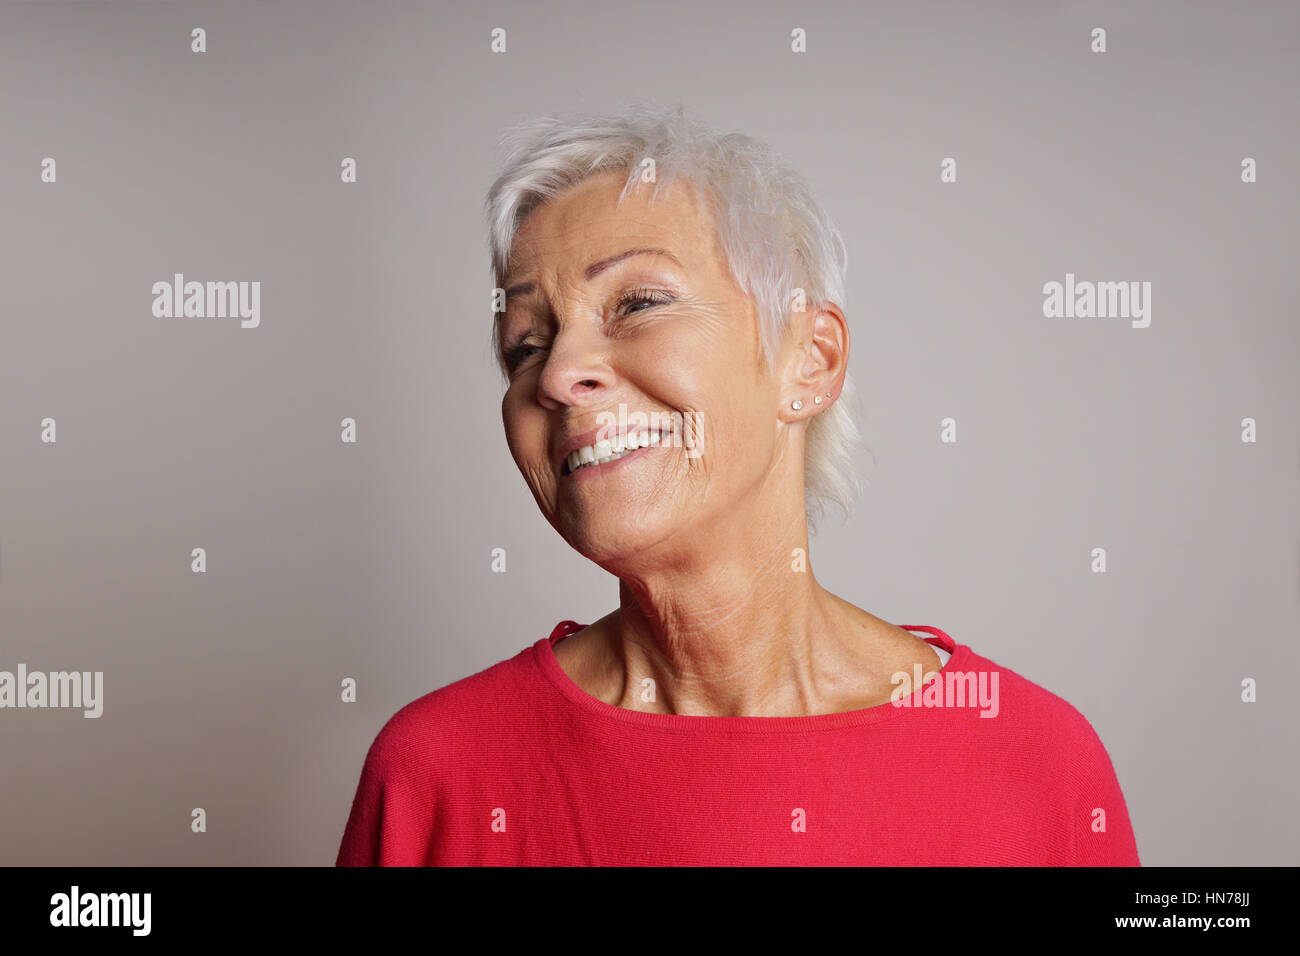 happy older woman with trendy short white hair laughing. gray background with copy space. Stock Photo